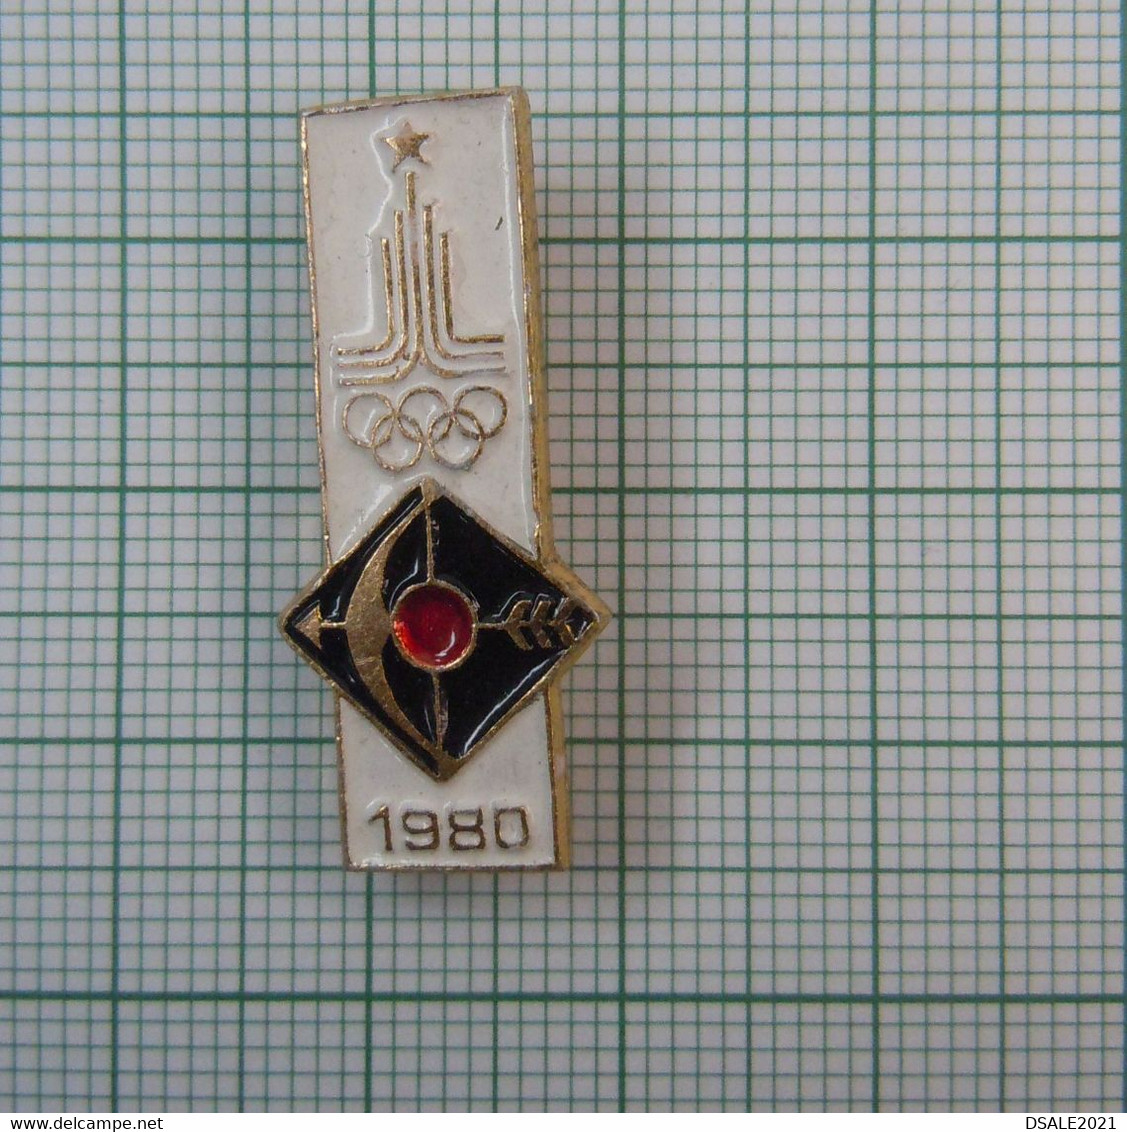 Russia USSR Russland Sowjetunion Moscow 1980 Summer Olympic Archery Sport Mascot Vintage Pin Badge (m984) - Archery